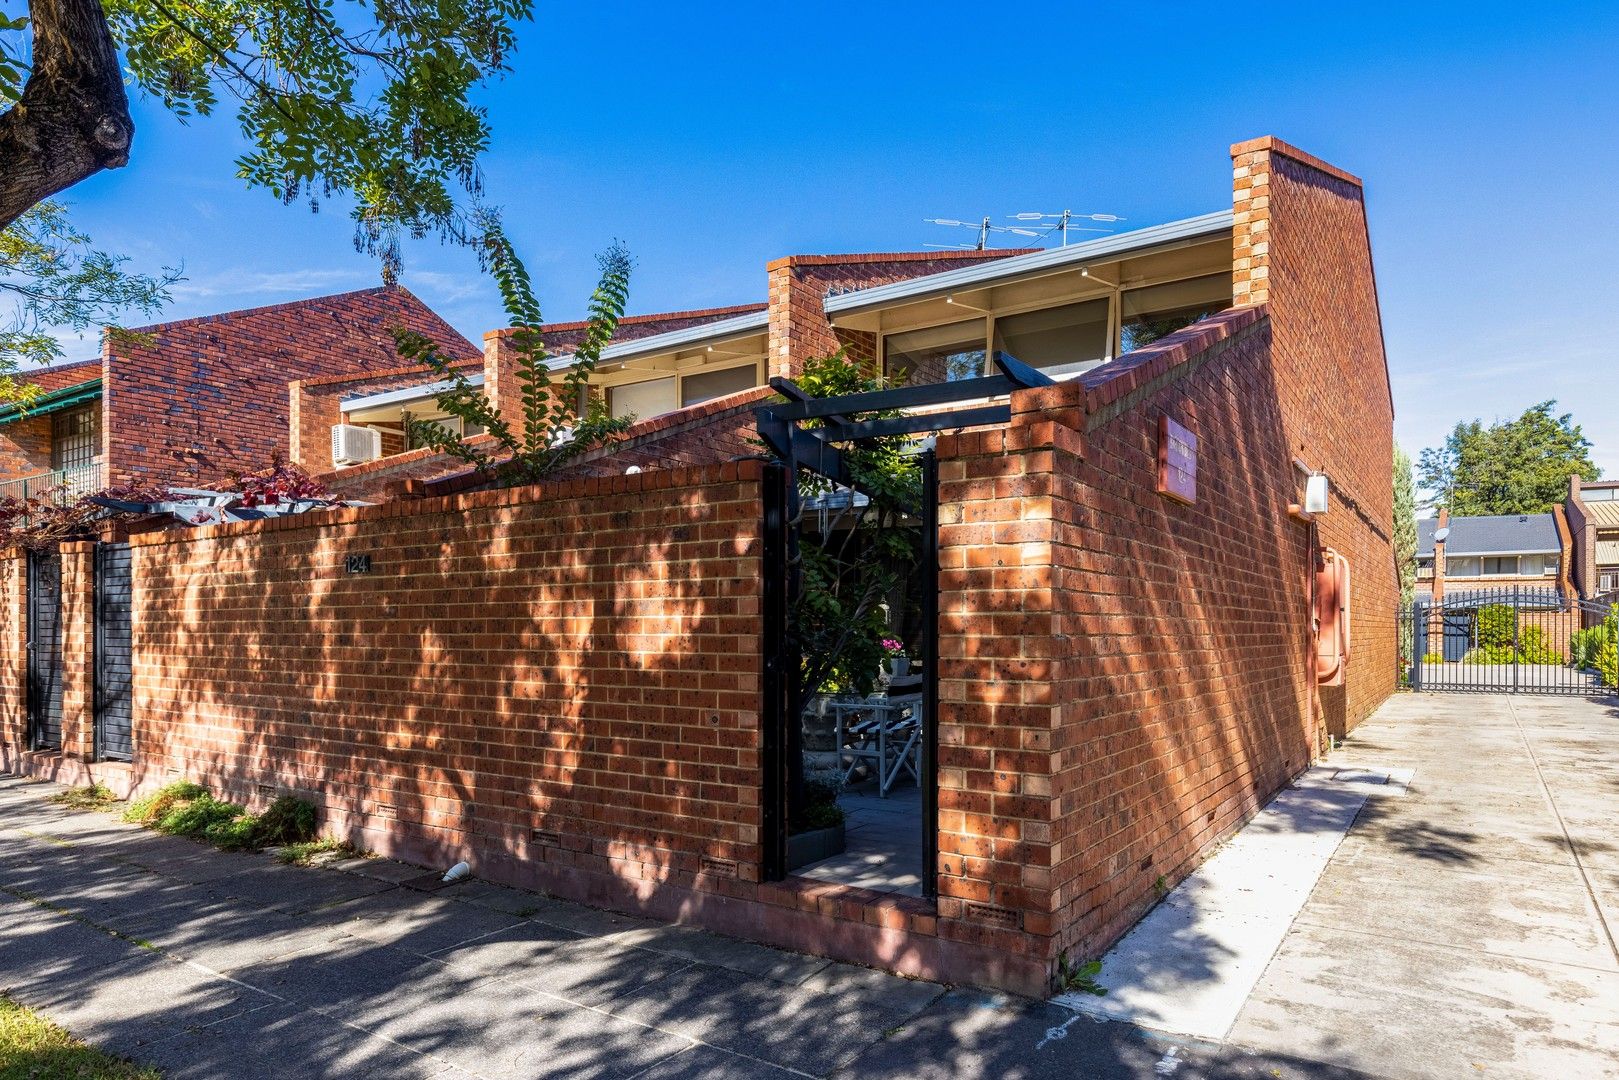 2 bedrooms Townhouse in 3/124 Barton Terrace NORTH ADELAIDE SA, 5006